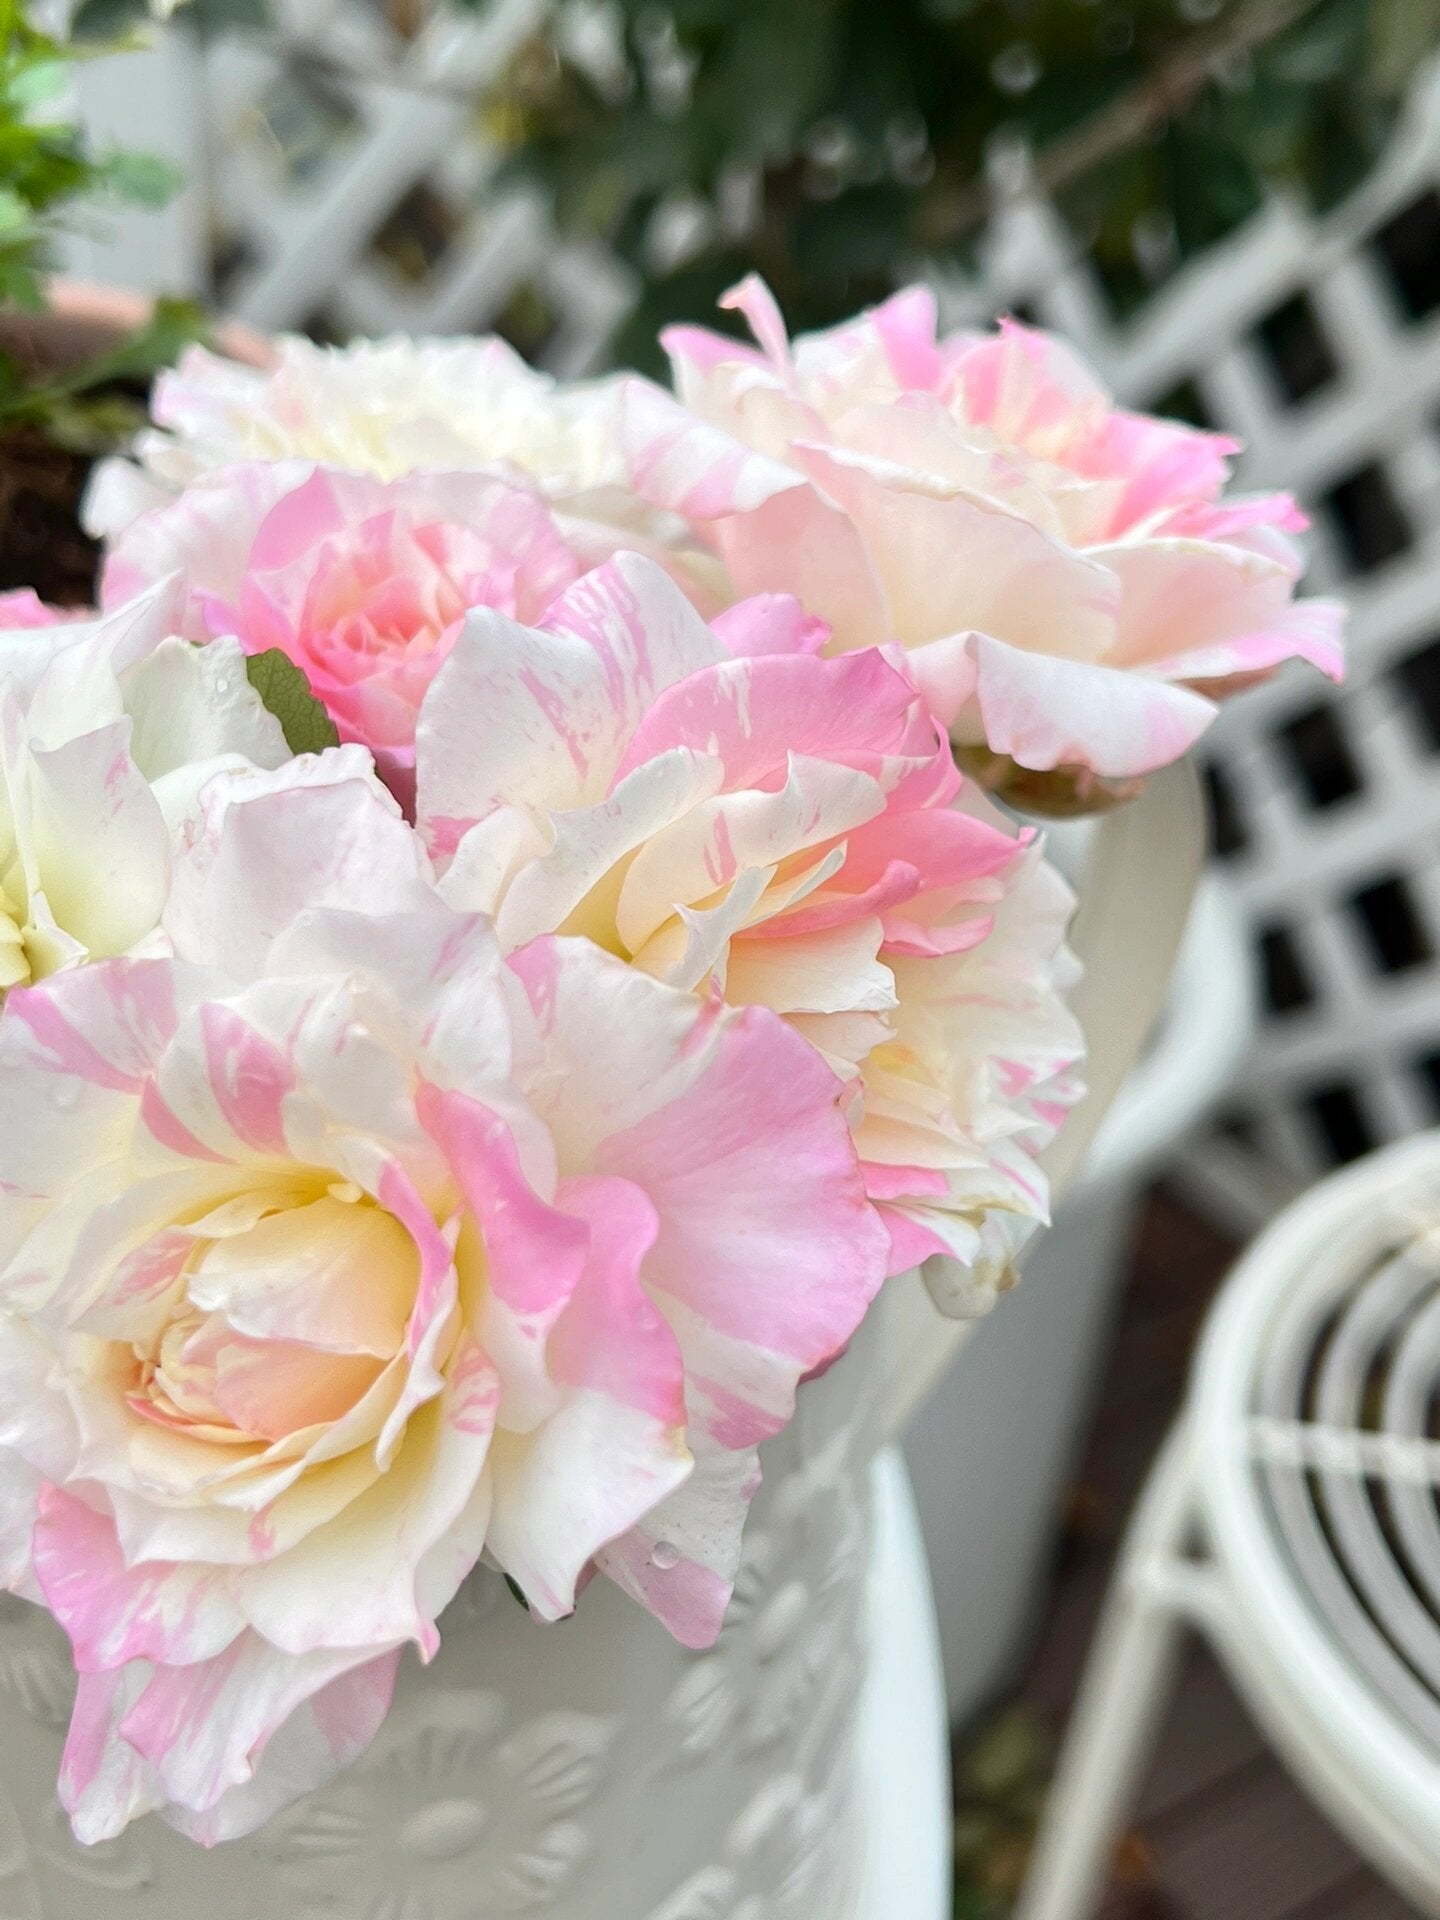 Striped Rose【Mille-feuille｜ミルフィーユ】-3 Gal+ OwnRoot Bare Root｜法式千层酥｜ Junko Kawamoto｜ Exquisite| Easy to Grow | Variegated Color|